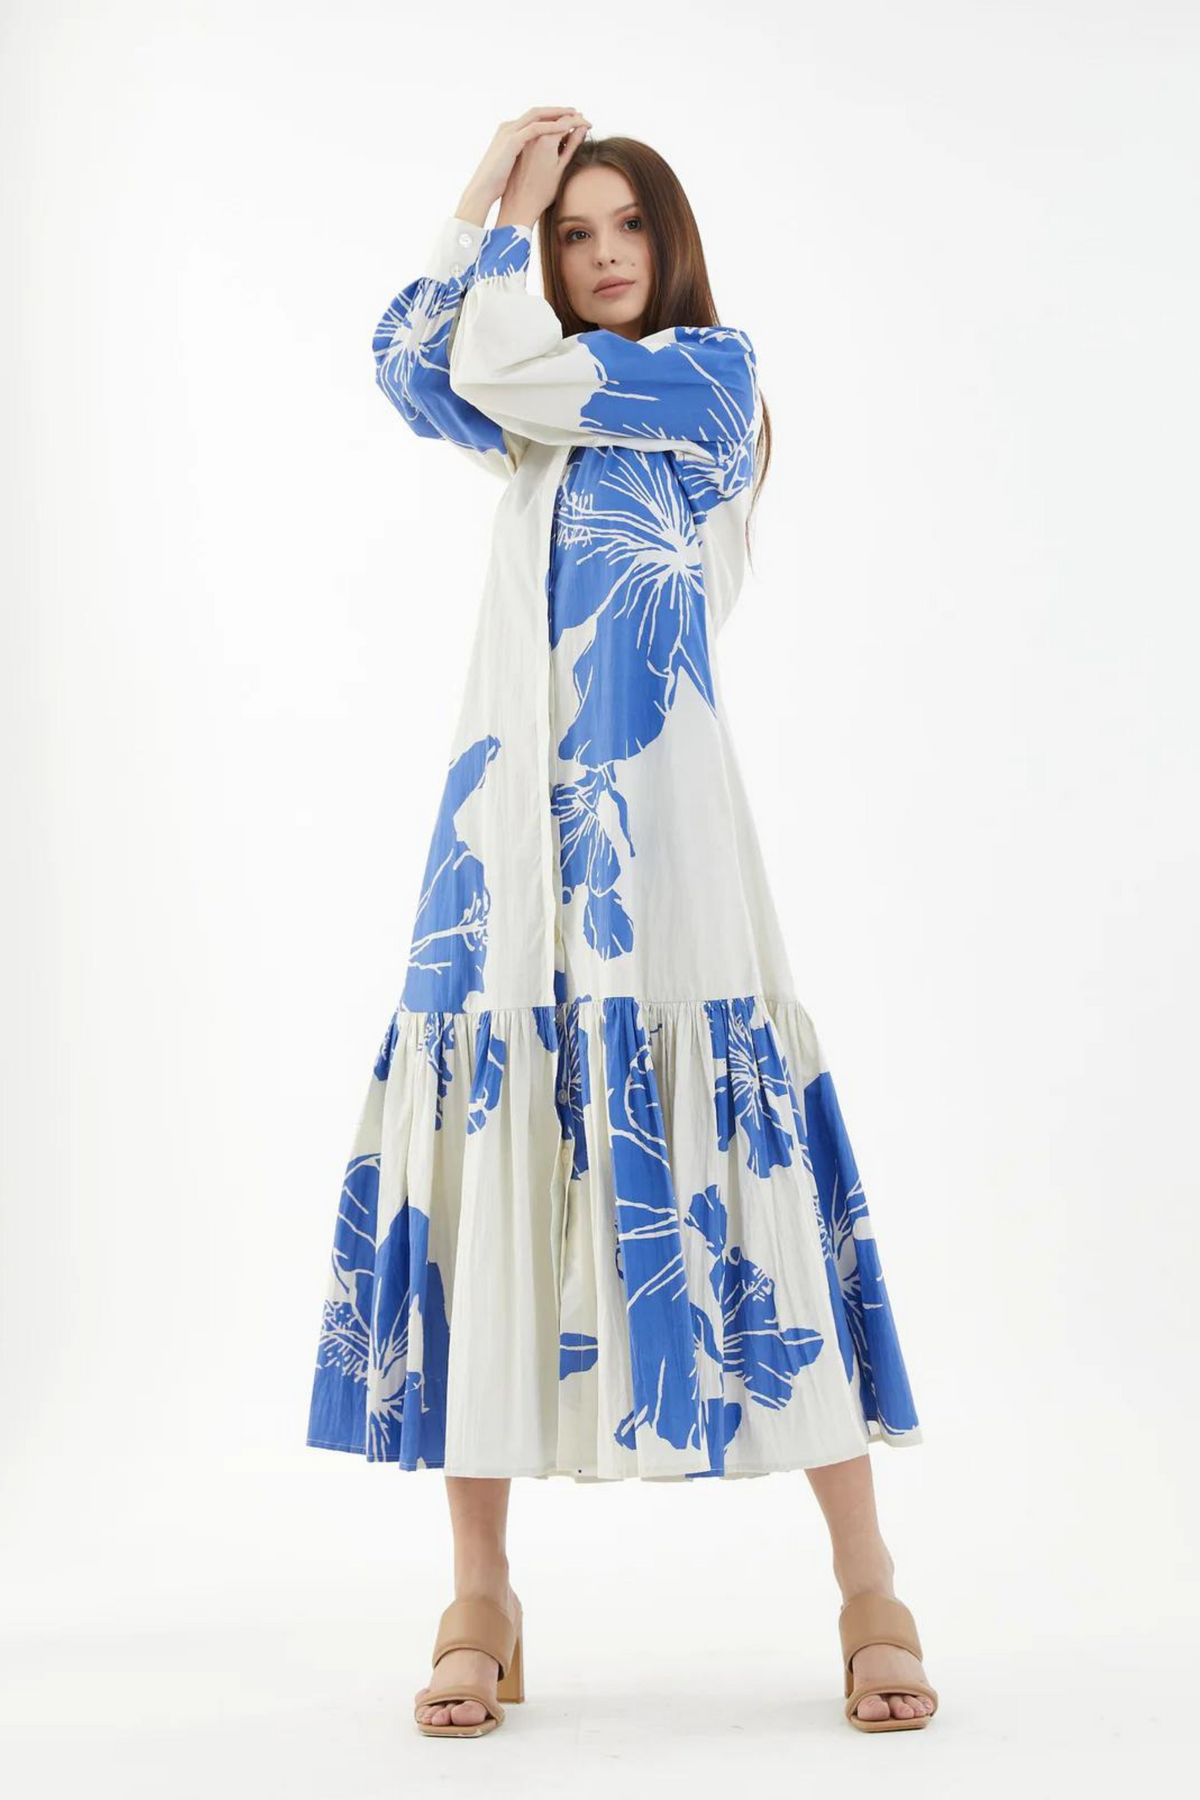 White And Blue Floral Single Tier Dress